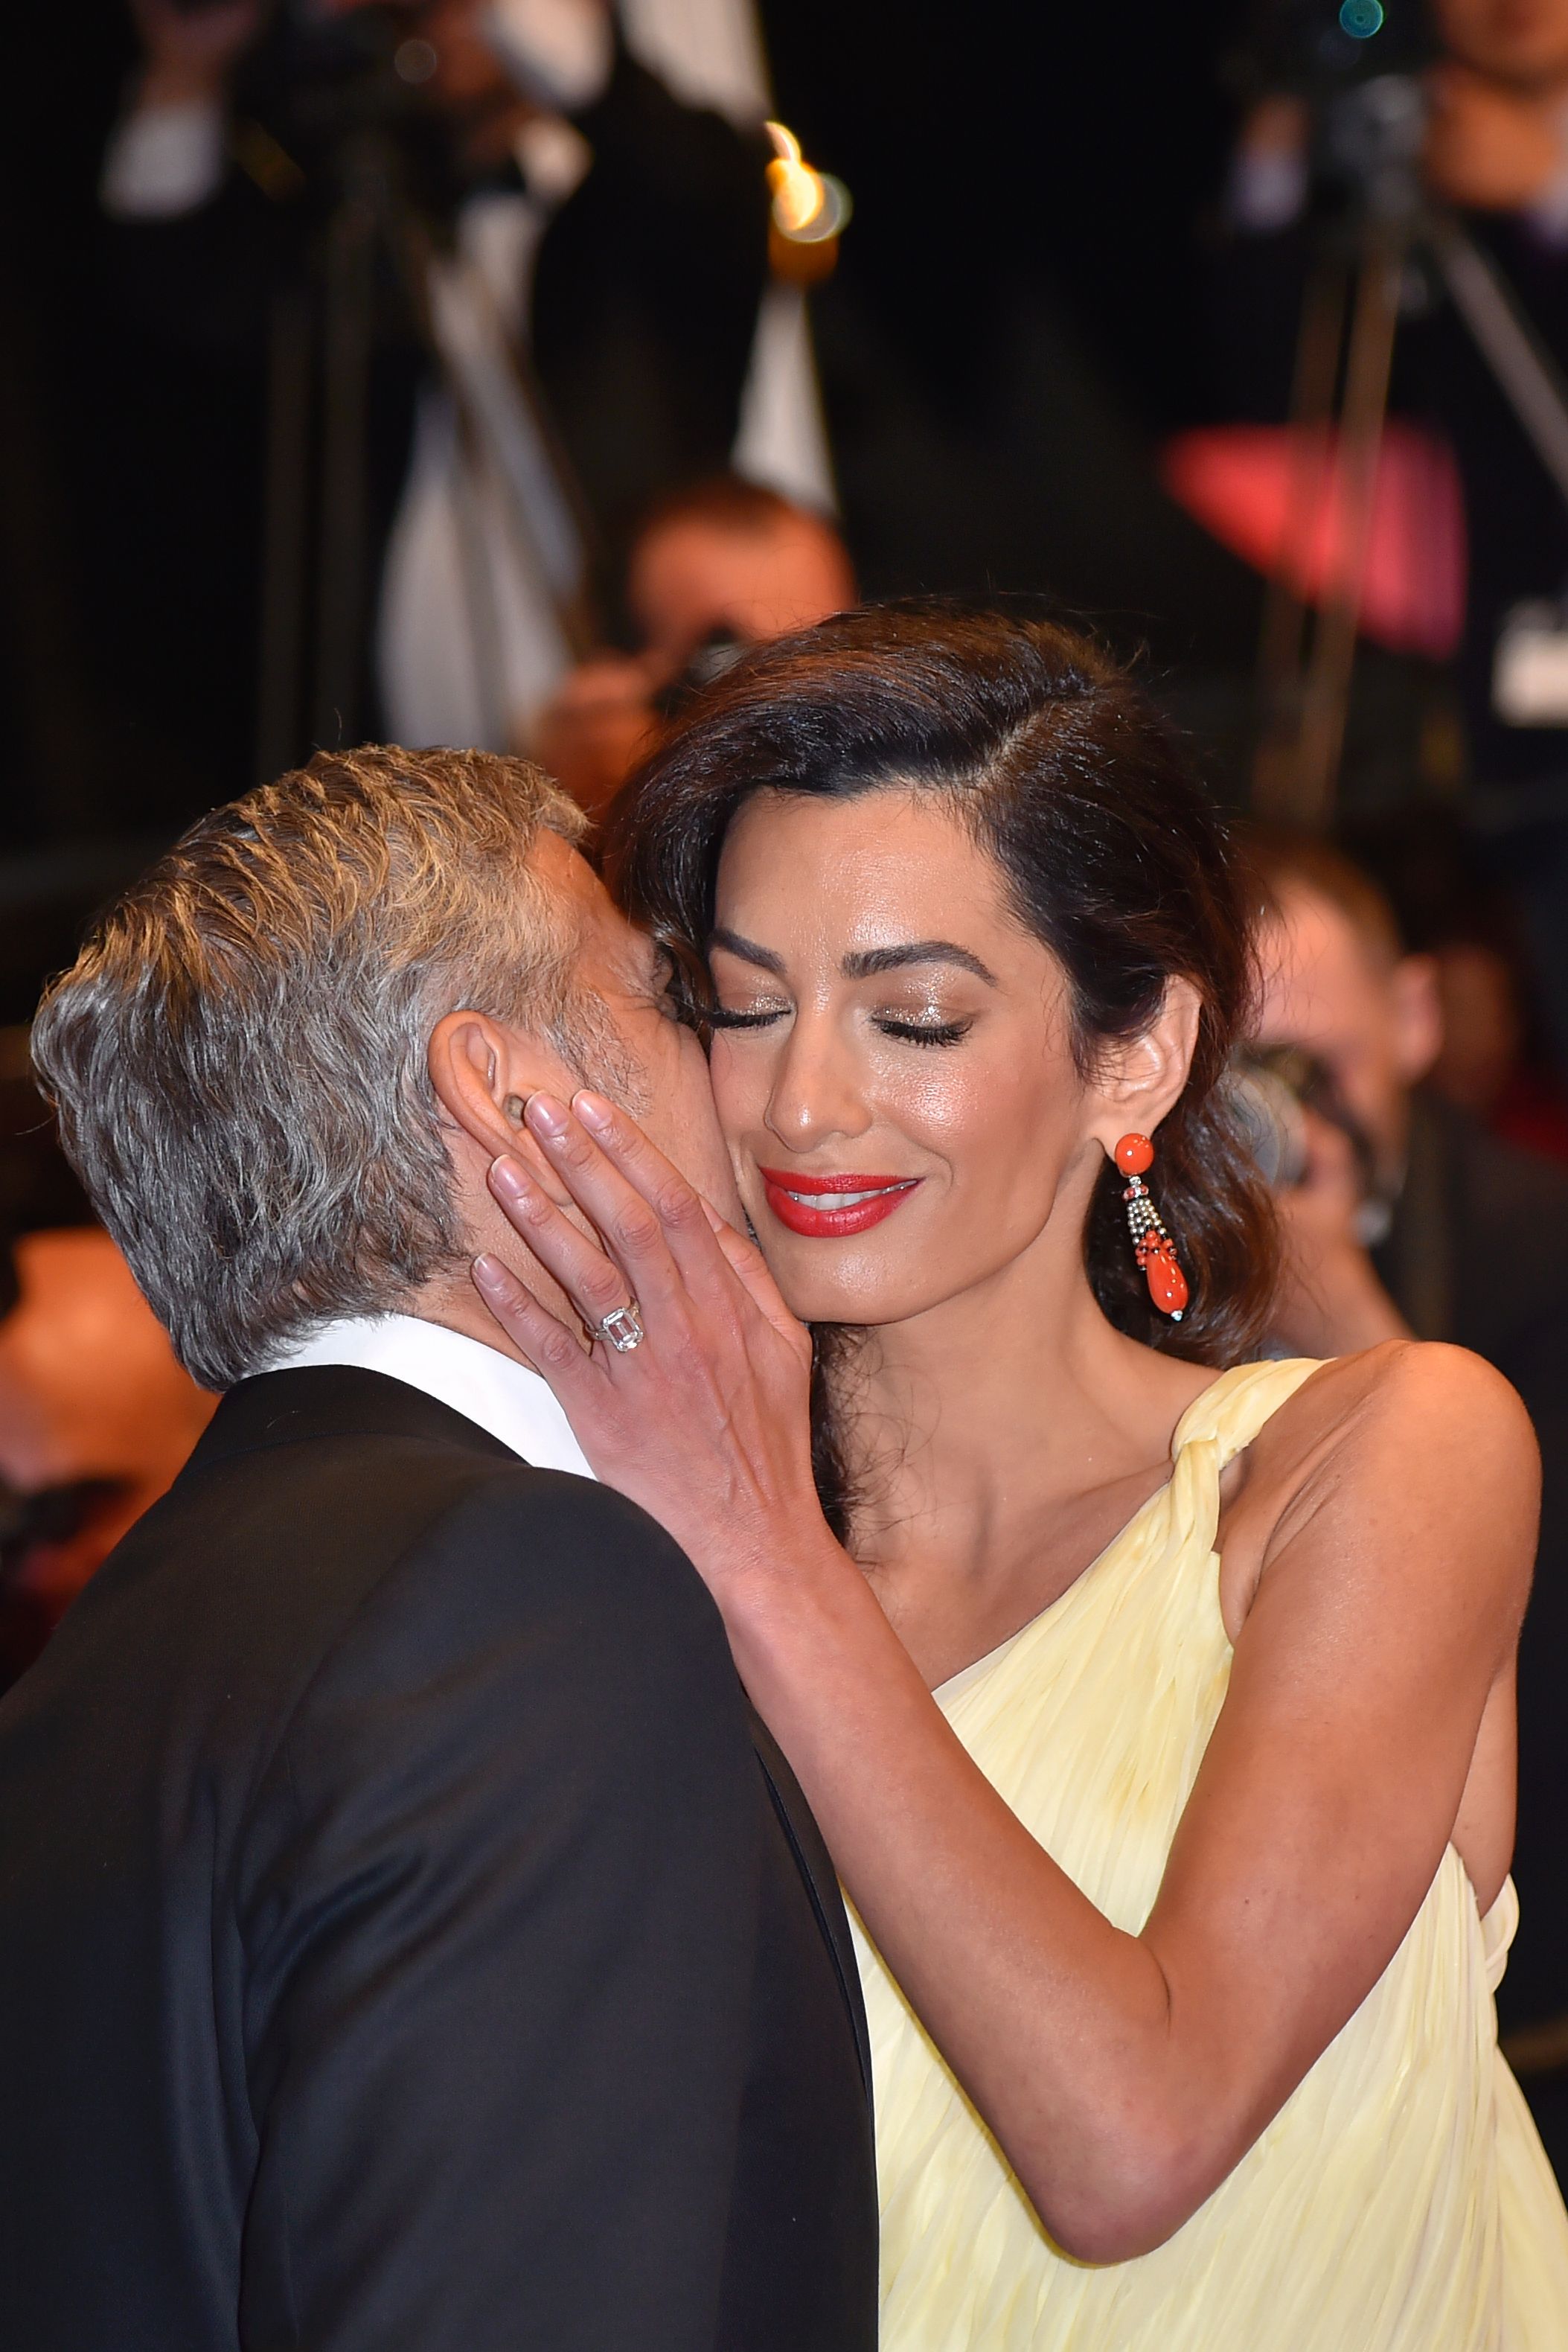 George Clooney and Amal Clooney at the 69th Cannes Film Festival in Cannes, southern France on May 12, 2016 | Source: Getty Images